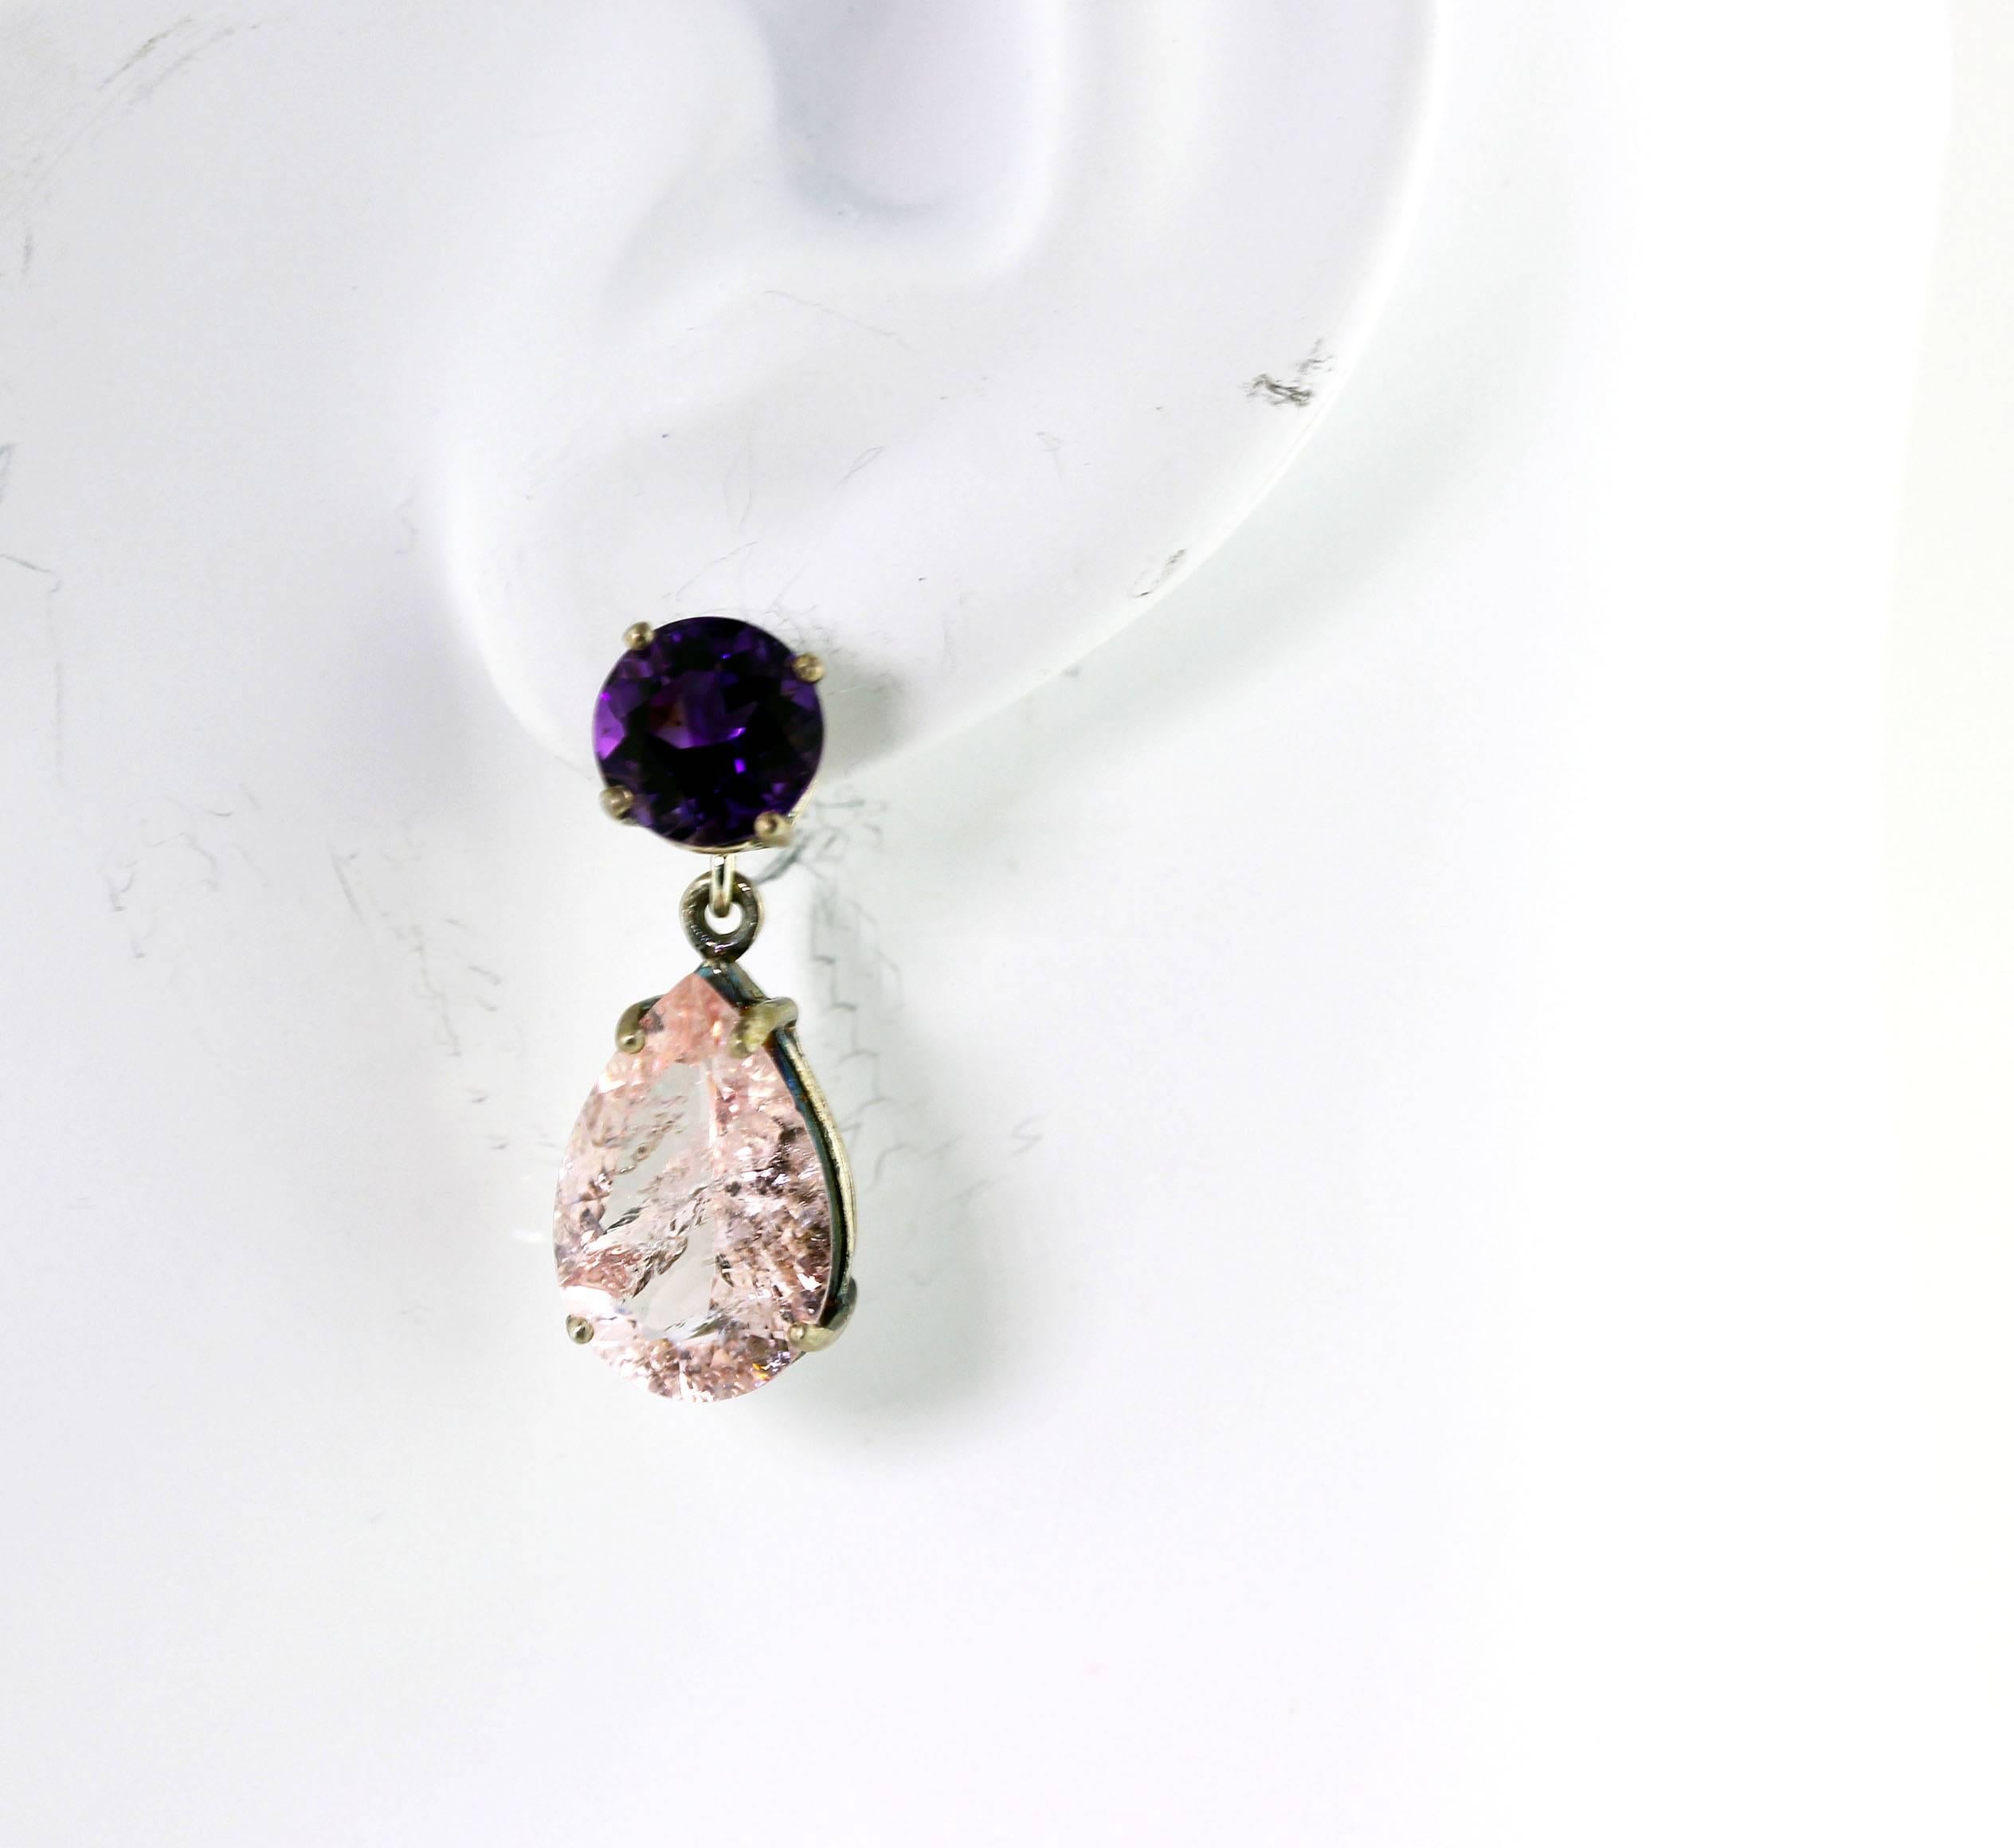 Women's Unique3.62 Carats Amethysts & 15.16 Carats of Morganite Sterling Silver Earrings